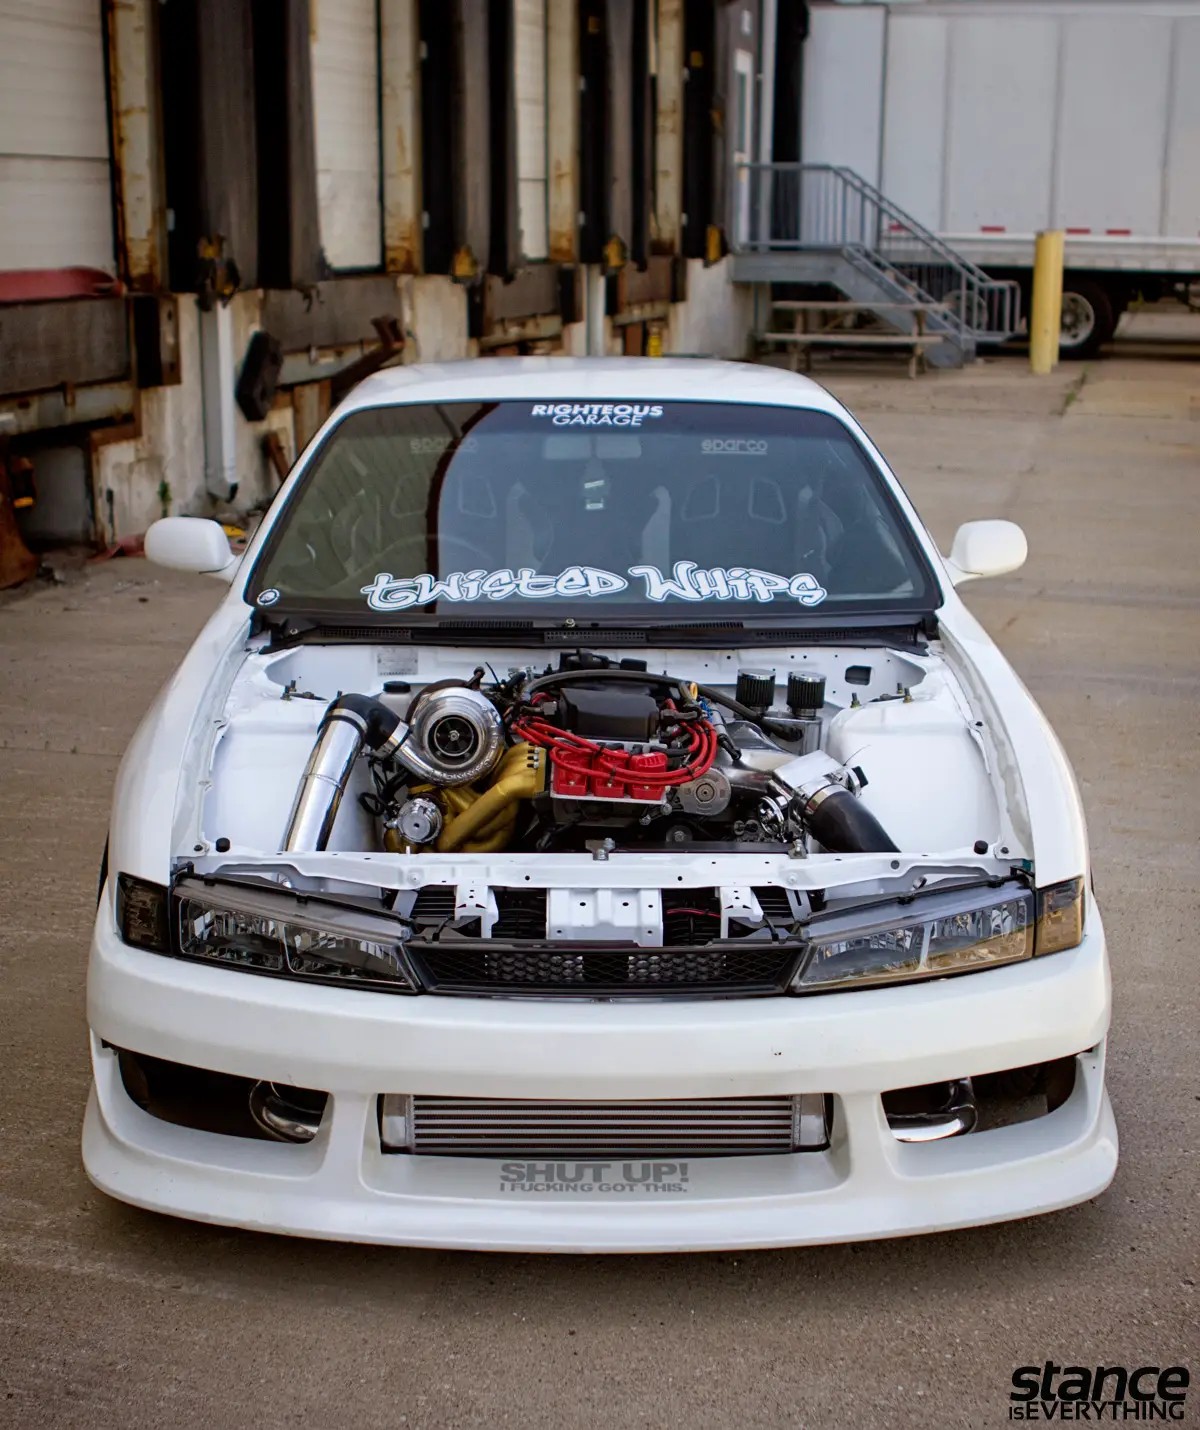 vr6t-nissan-s14-engine-bay-outdoors-1